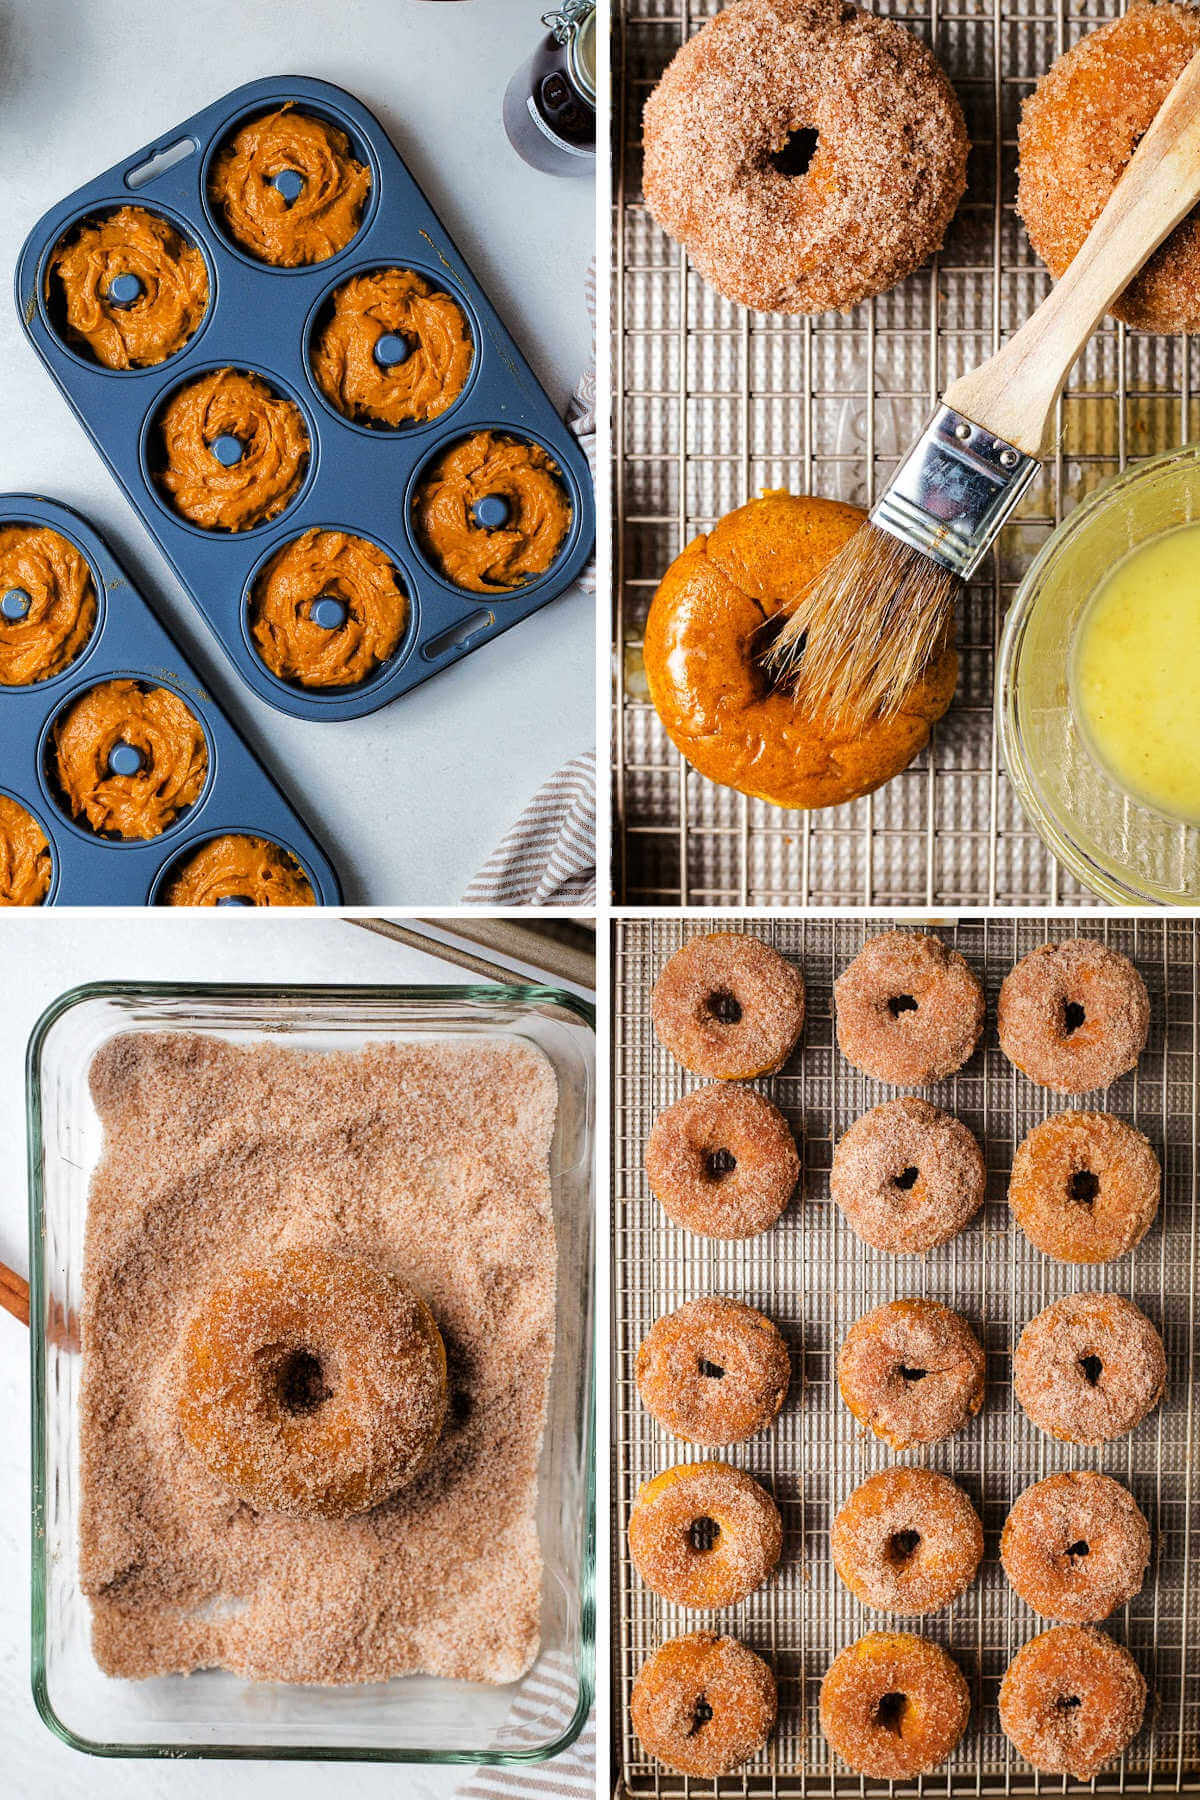 batter in donut pans; brushing donuts with butter and rolling in cinnamon sugar for pumpkin donuts.